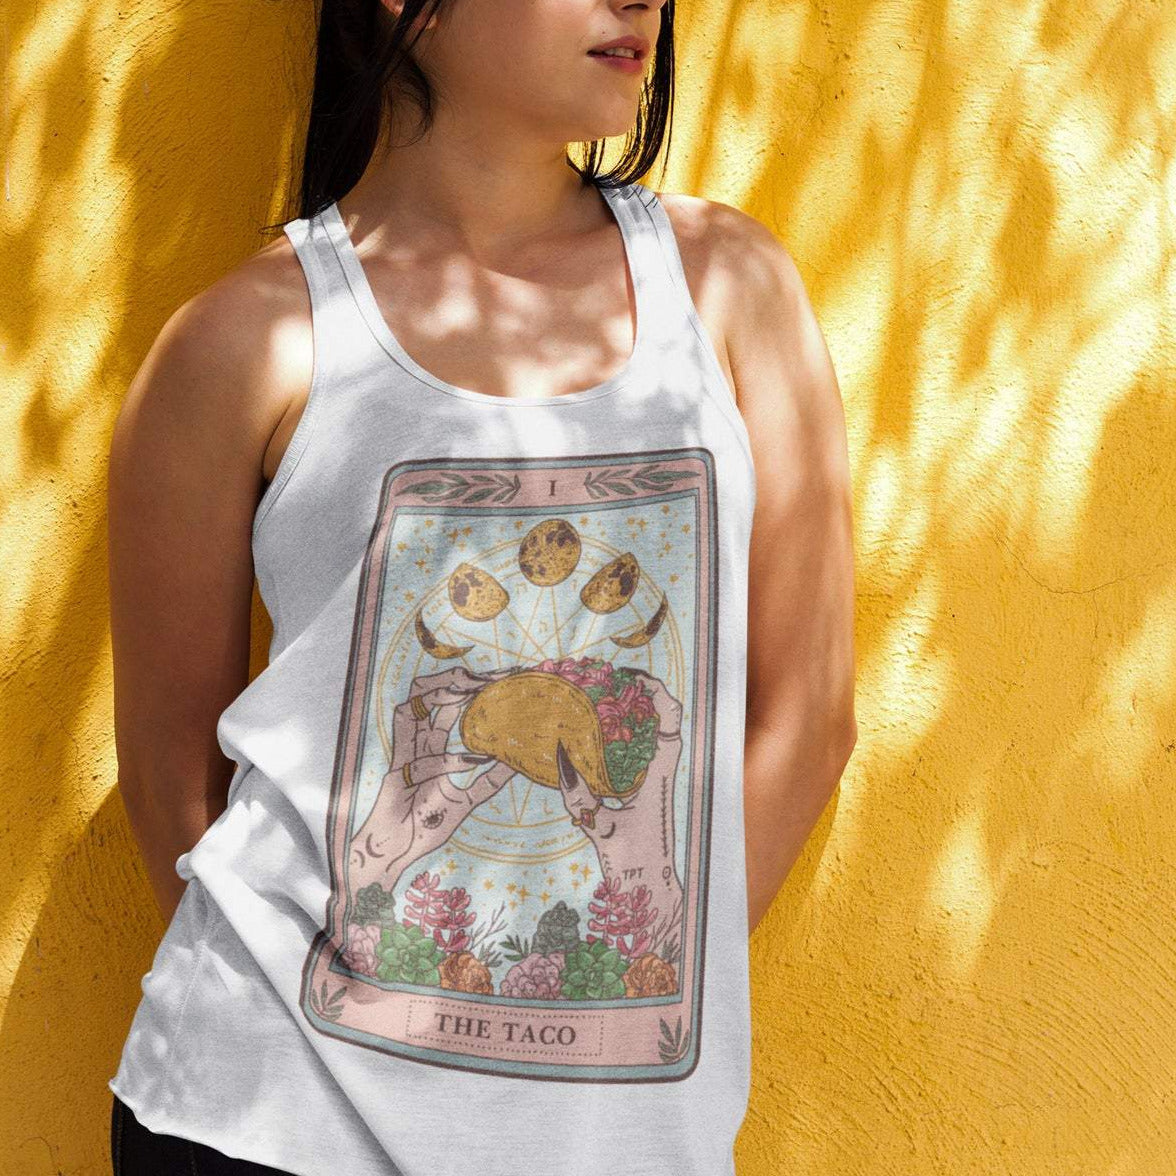 « THE TACO » WOMEN'S SLOUCHY or RACERBACK TANK